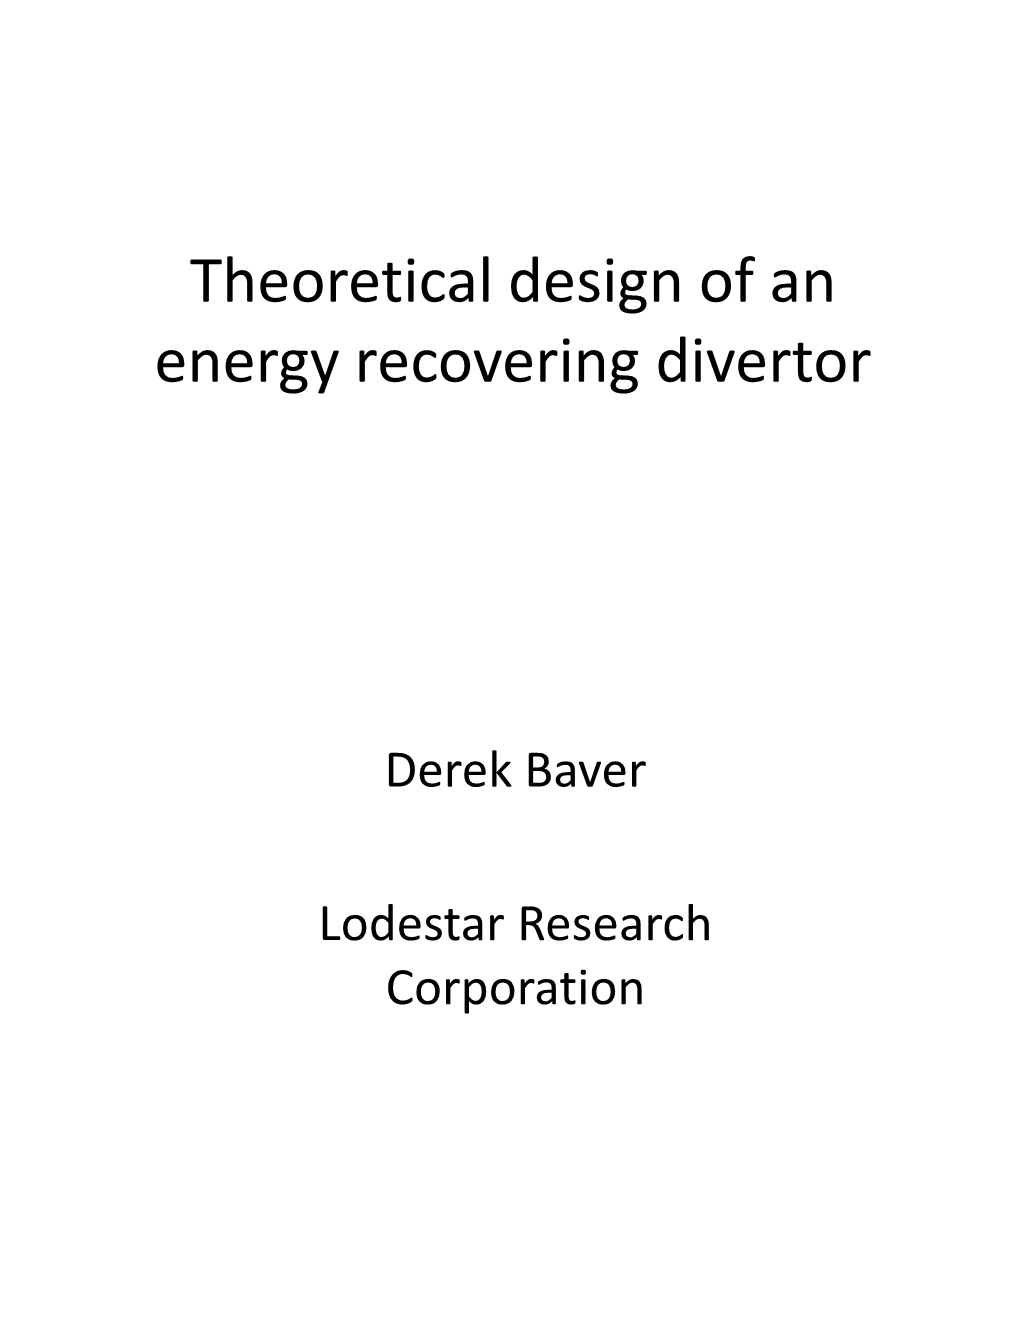 Theoretical Design of an Energy Recovering Divertor